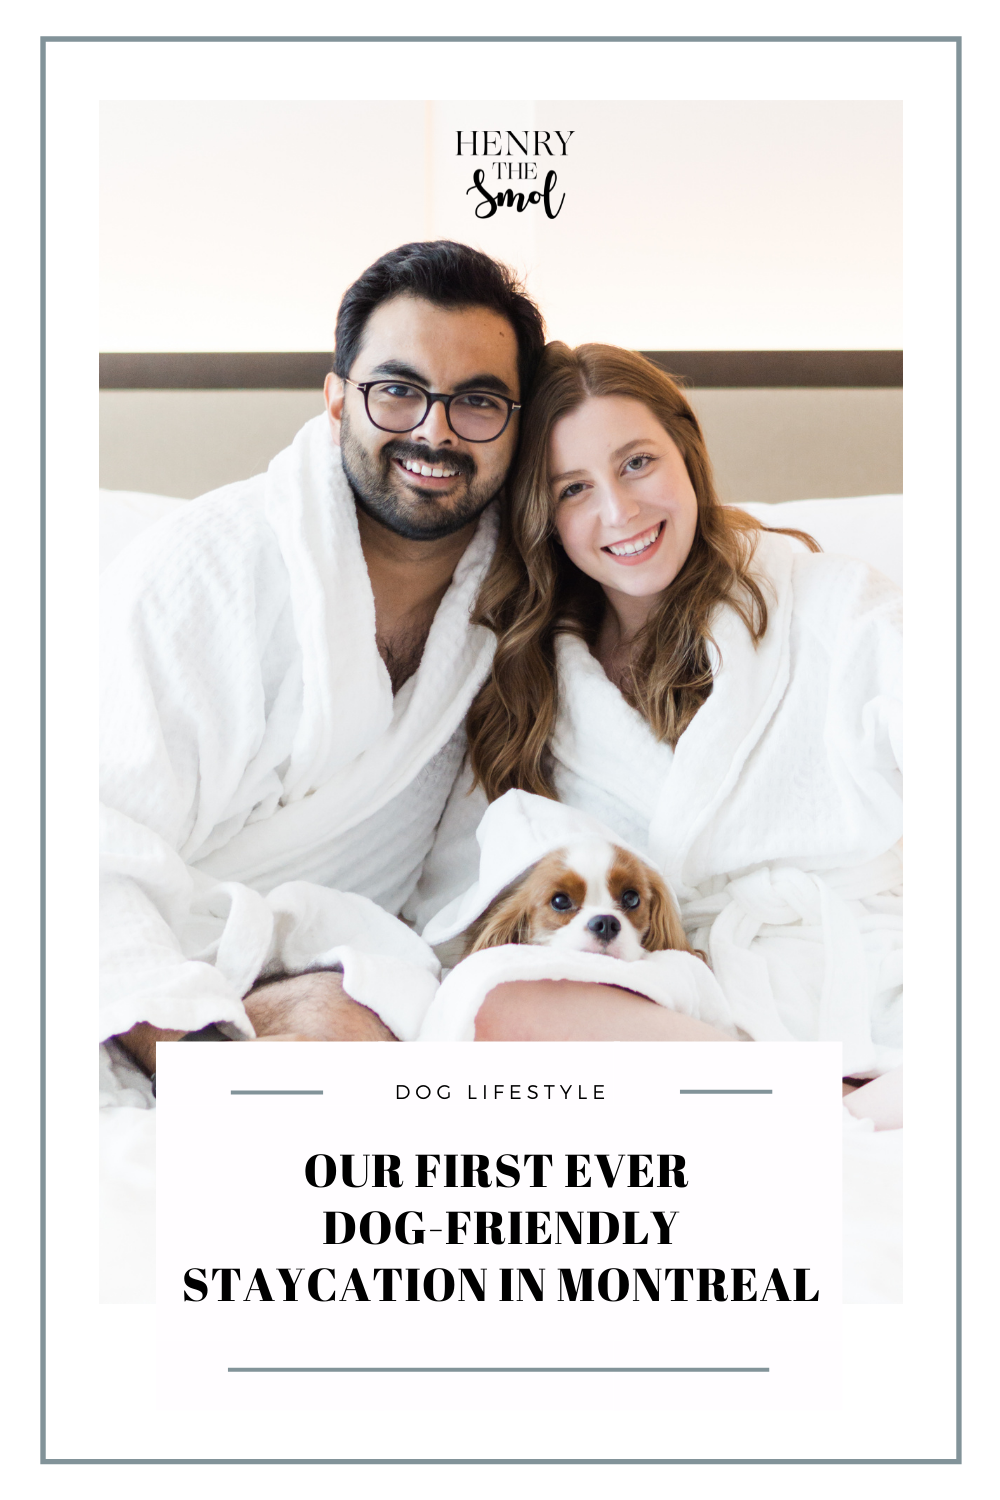 Our Dog-Friendly Staycation At The Four Seasons Hotel